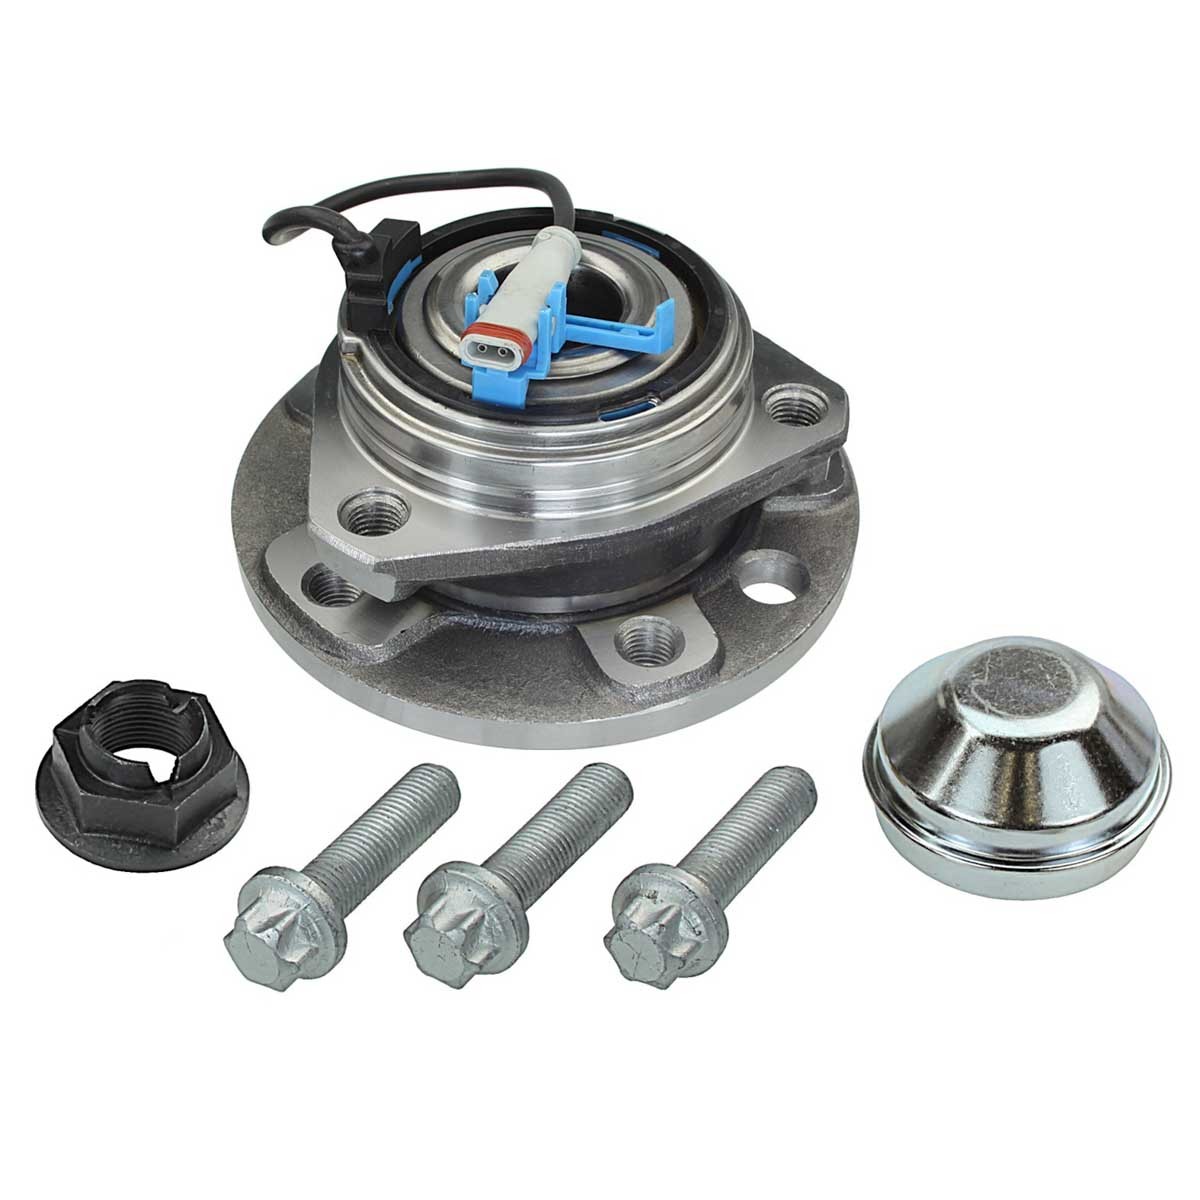 MEYLE 614 652 0011 Wheel bearing kit Front Axle, with attachment material, ORIGINAL Quality, with integrated ABS sensor, with integrated wheel bearing, 137 mm, Ball Bearing